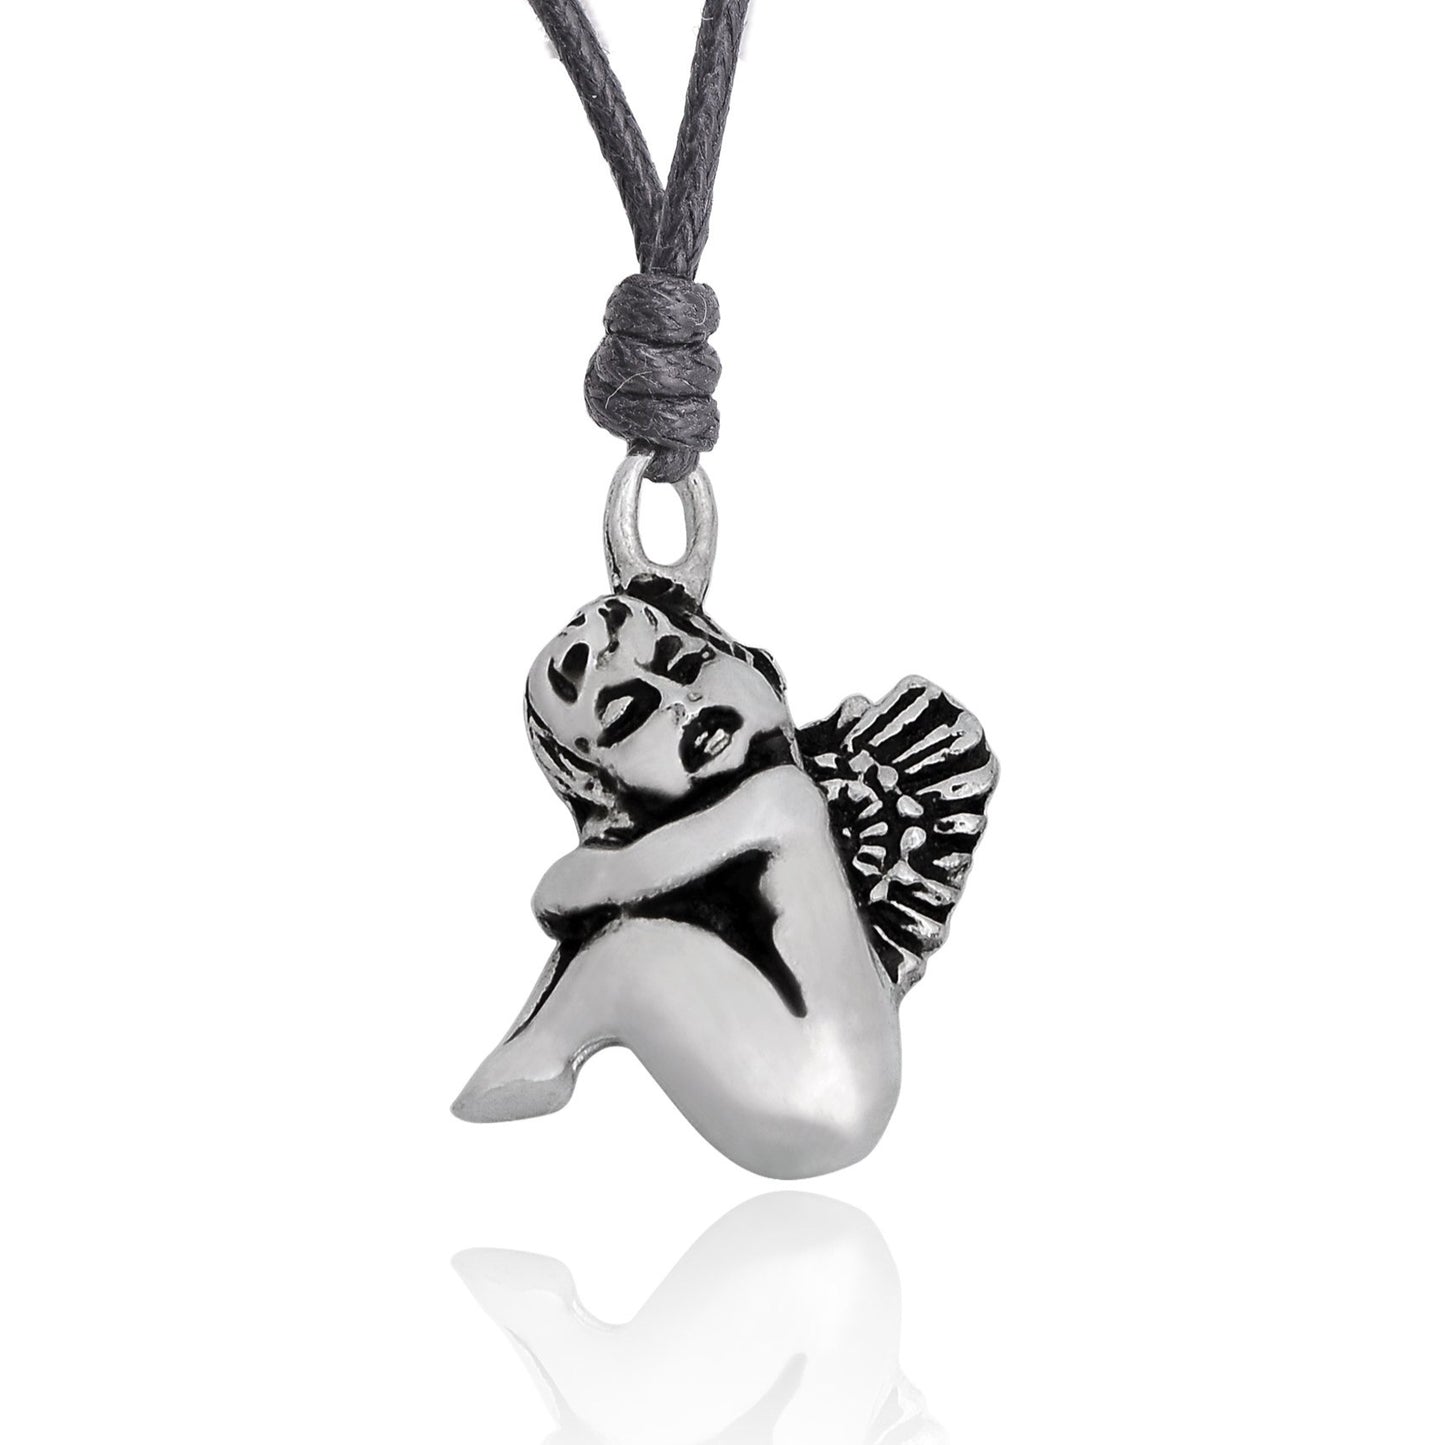 New Cupid Cherub Sterling-silver Pewter Brass Charm  Necklace Pendant Jewelry